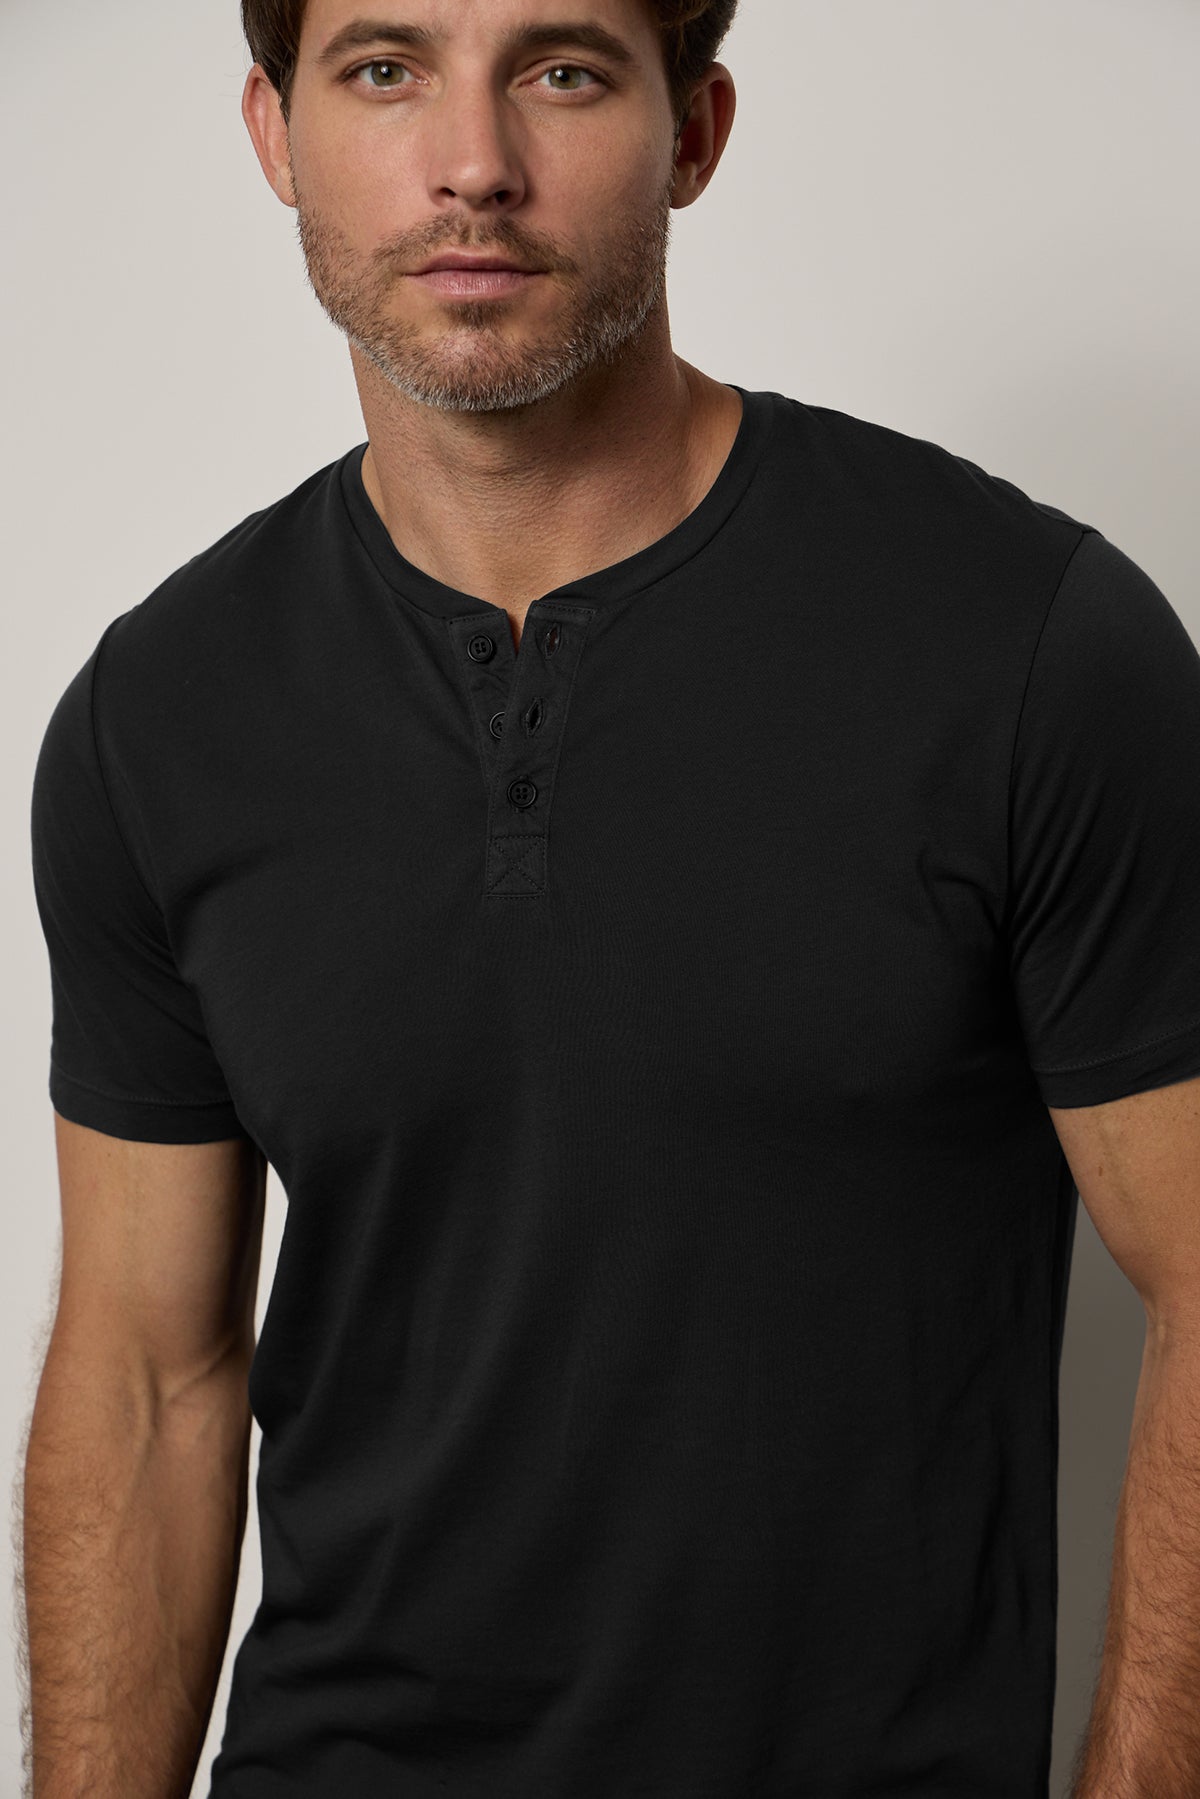 A man wearing a black Velvet by Graham & Spencer Fulton Henley tee, looking to the side, with a neutral expression on a plain background.-25943764304065